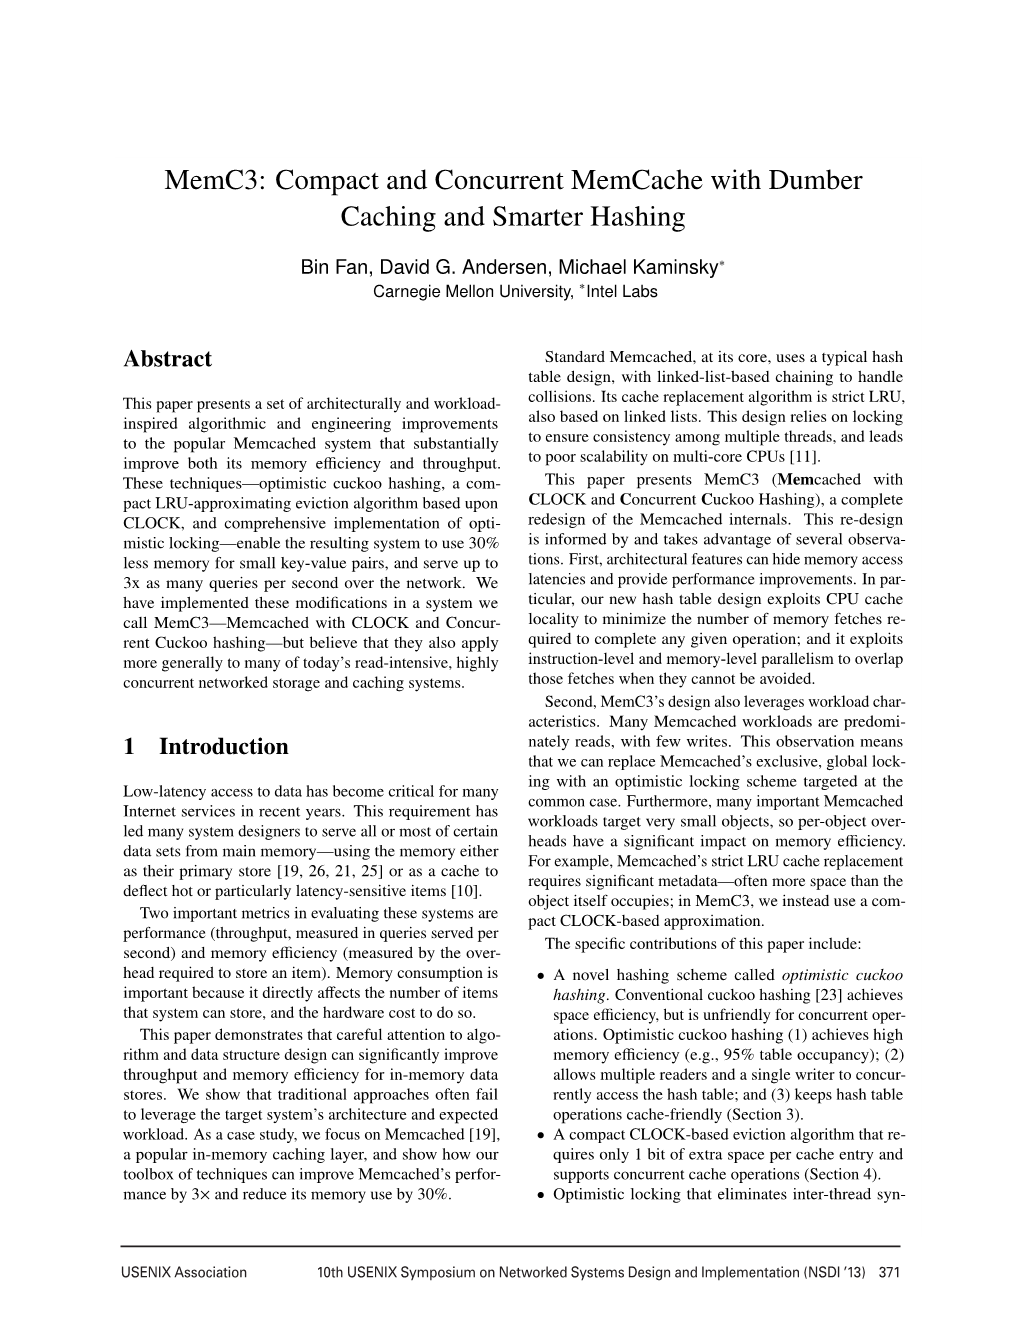 Memc3: Compact and Concurrent Memcache with Dumber Caching and Smarter Hashing